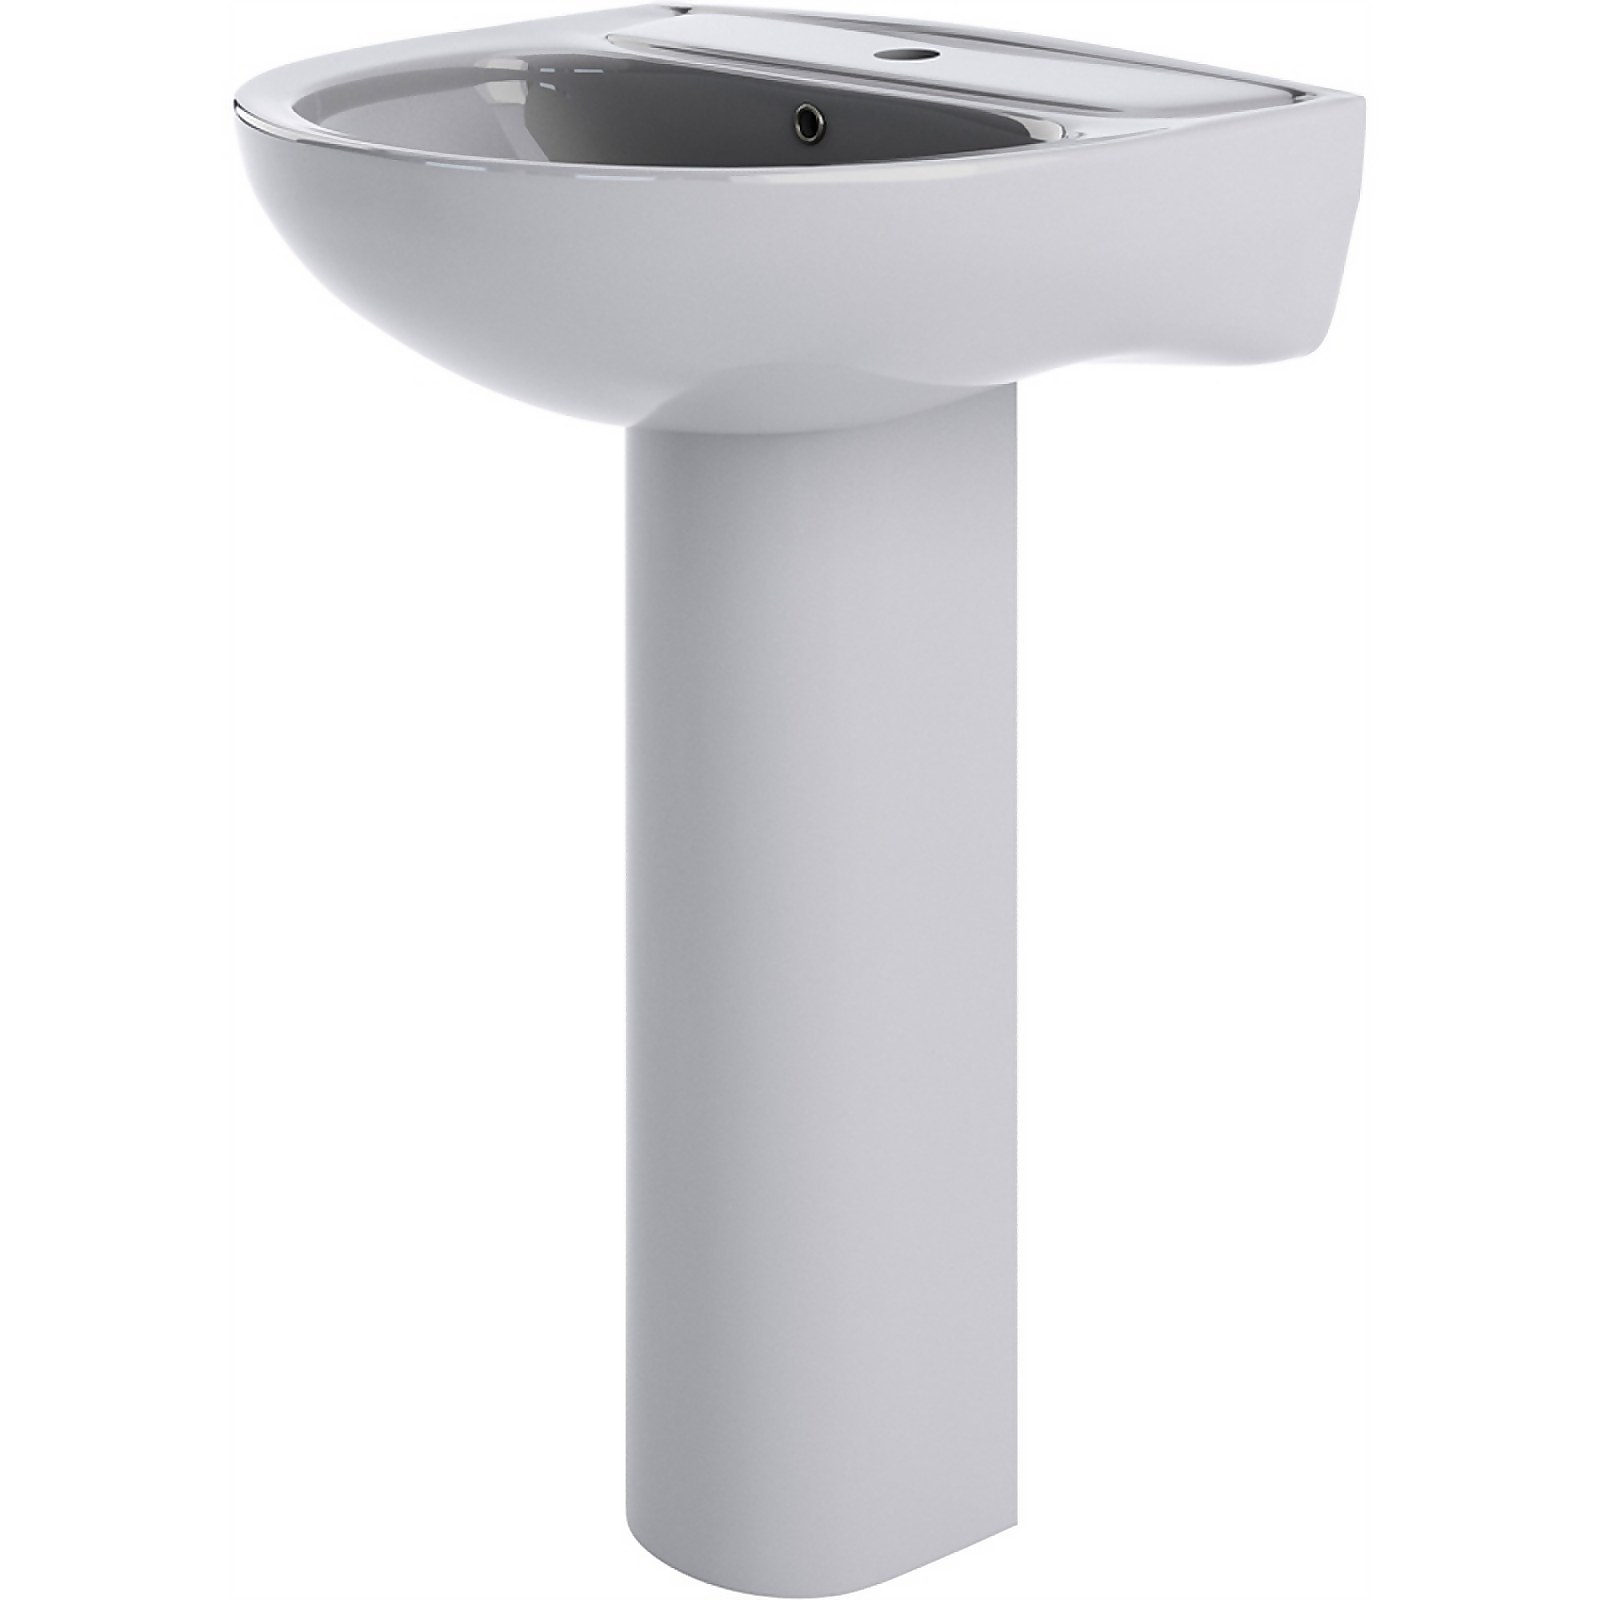 Photo of Balterley Ridley 1 Tap Hole Basin And Full Pedestal - 550mm